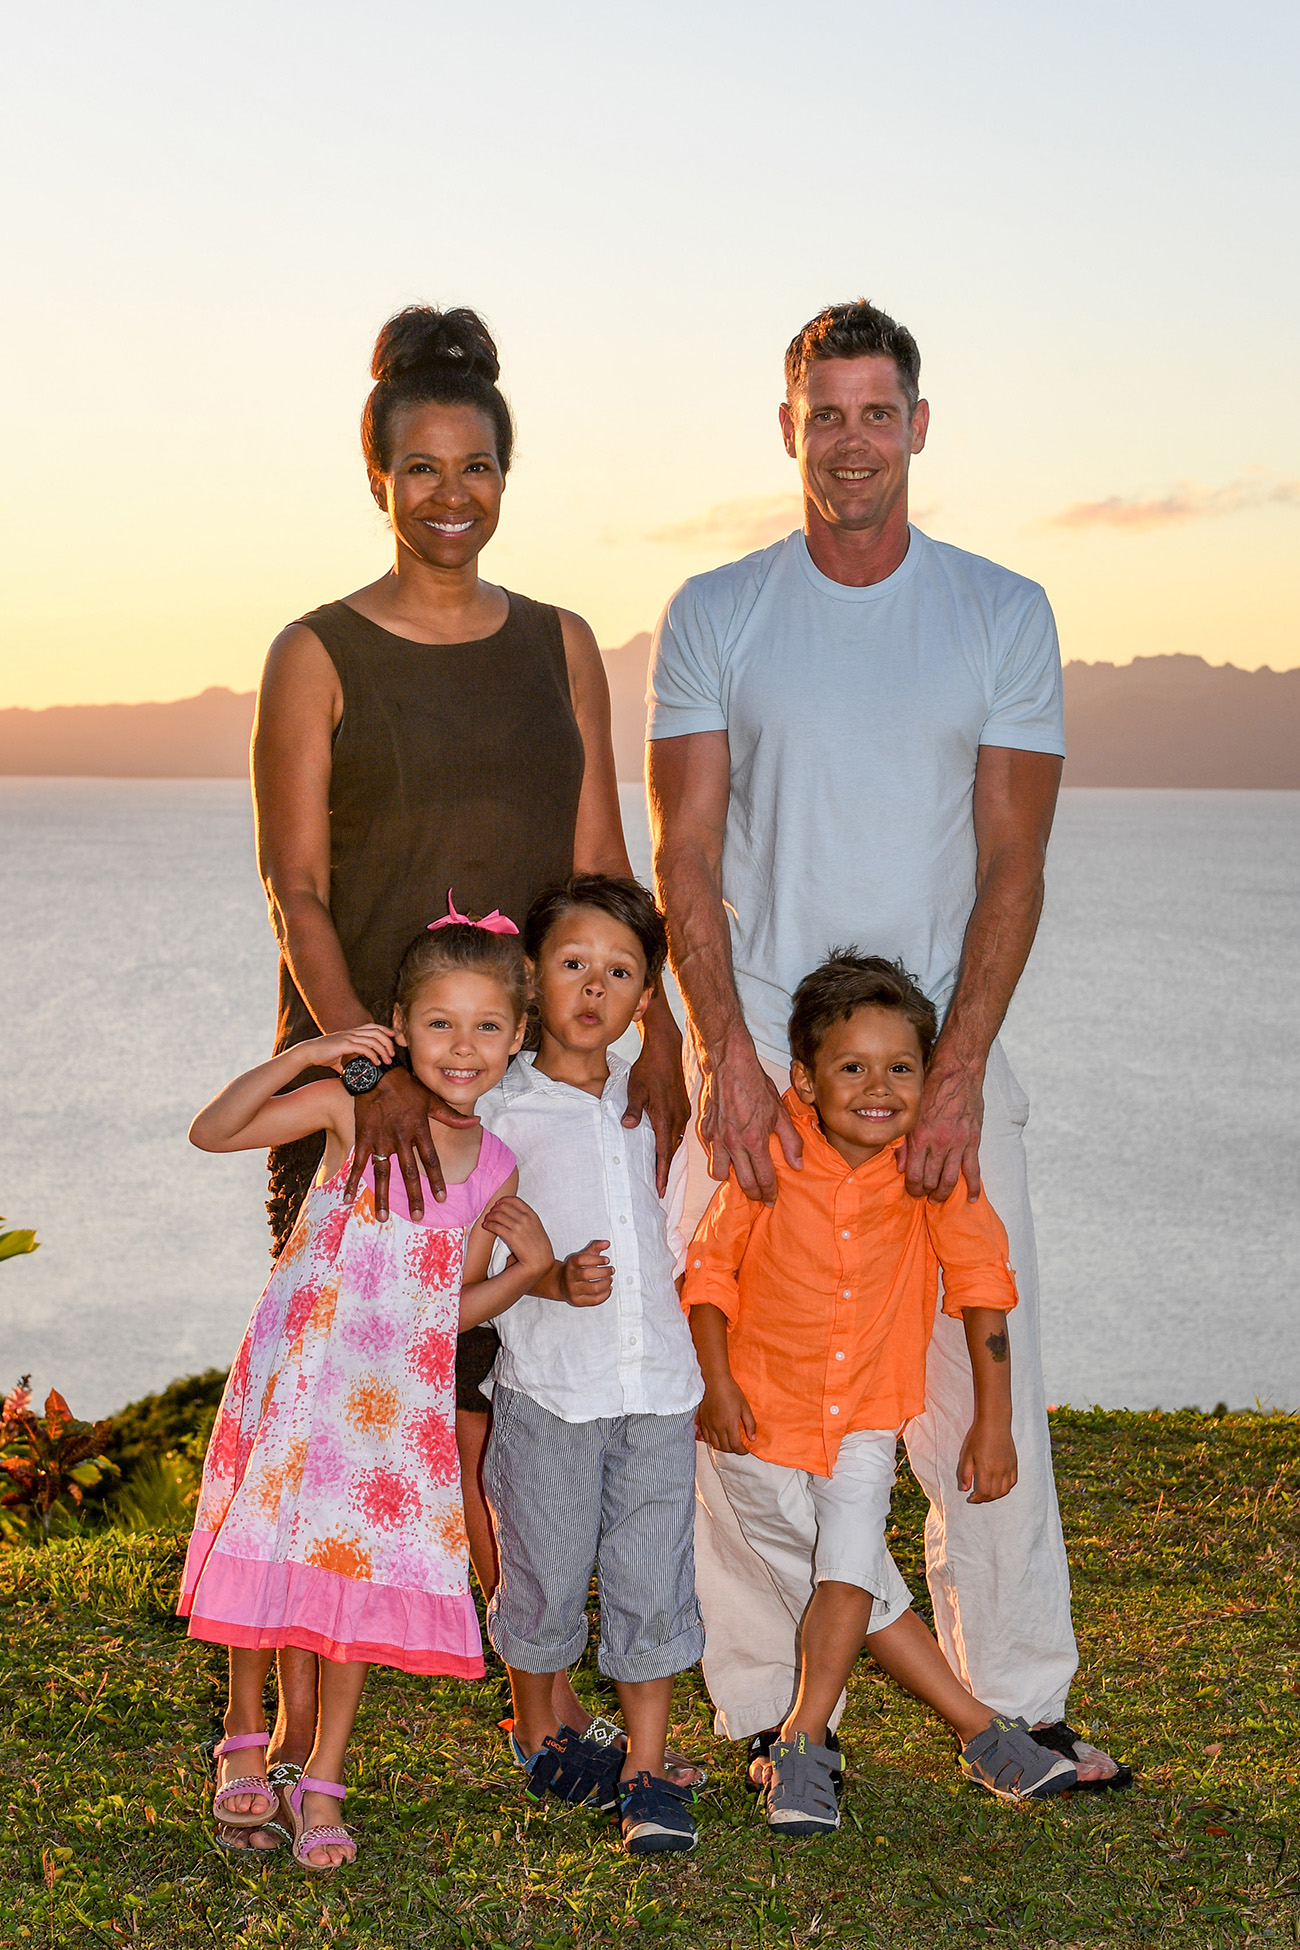 Family portrait against the ocean and sunset in Fiji family photoshoot